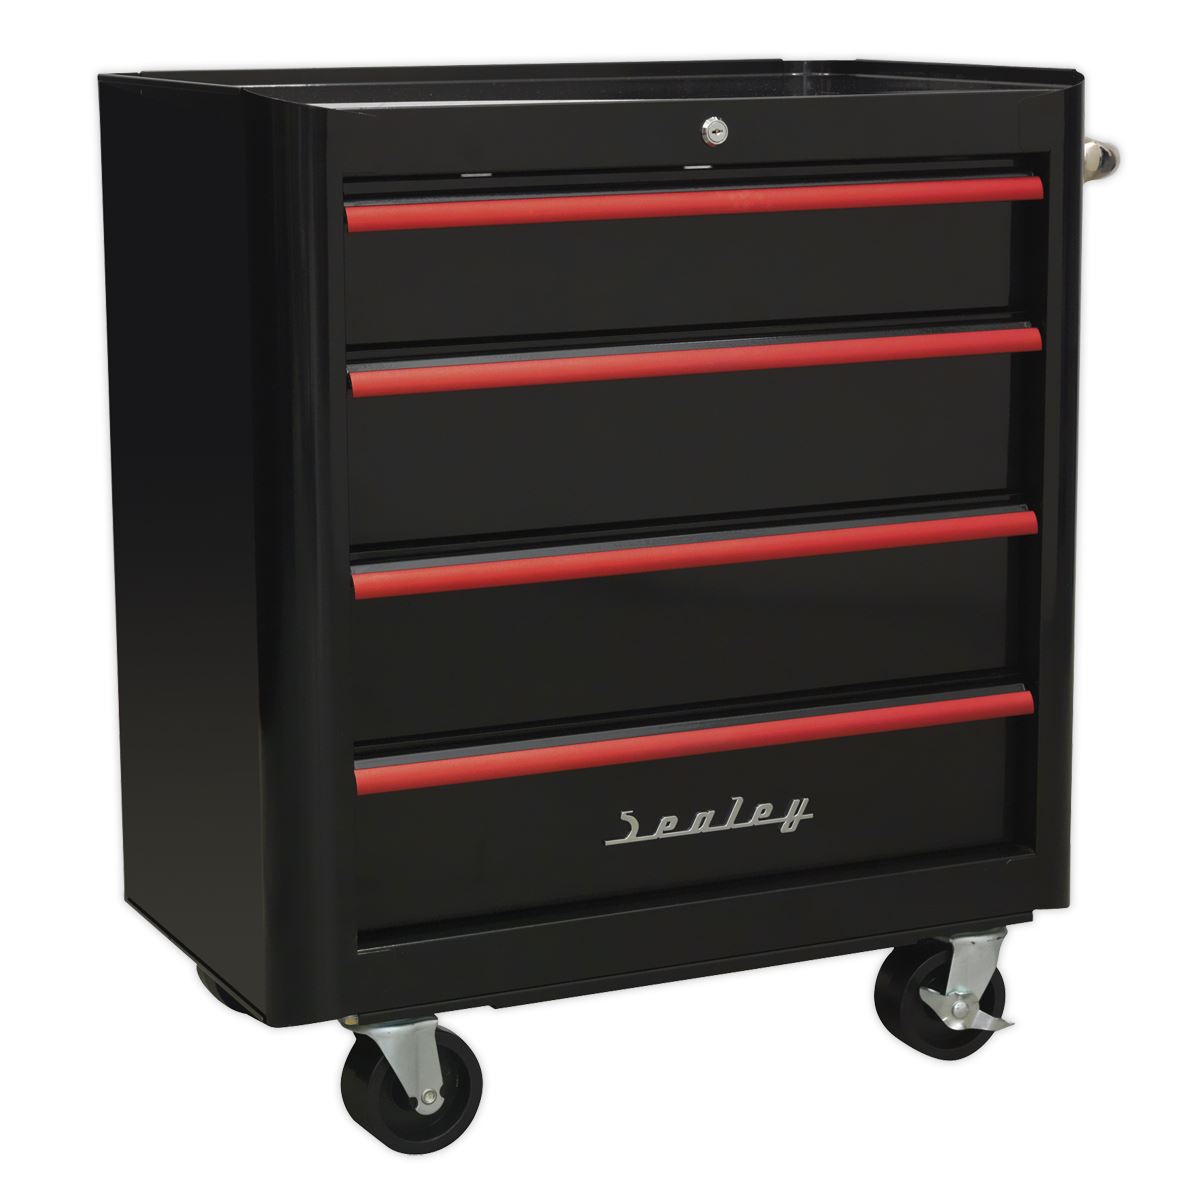 Sealey Premier Rollcab 4 Drawer Retro Style- Black with Red Anodised Drawer Pulls